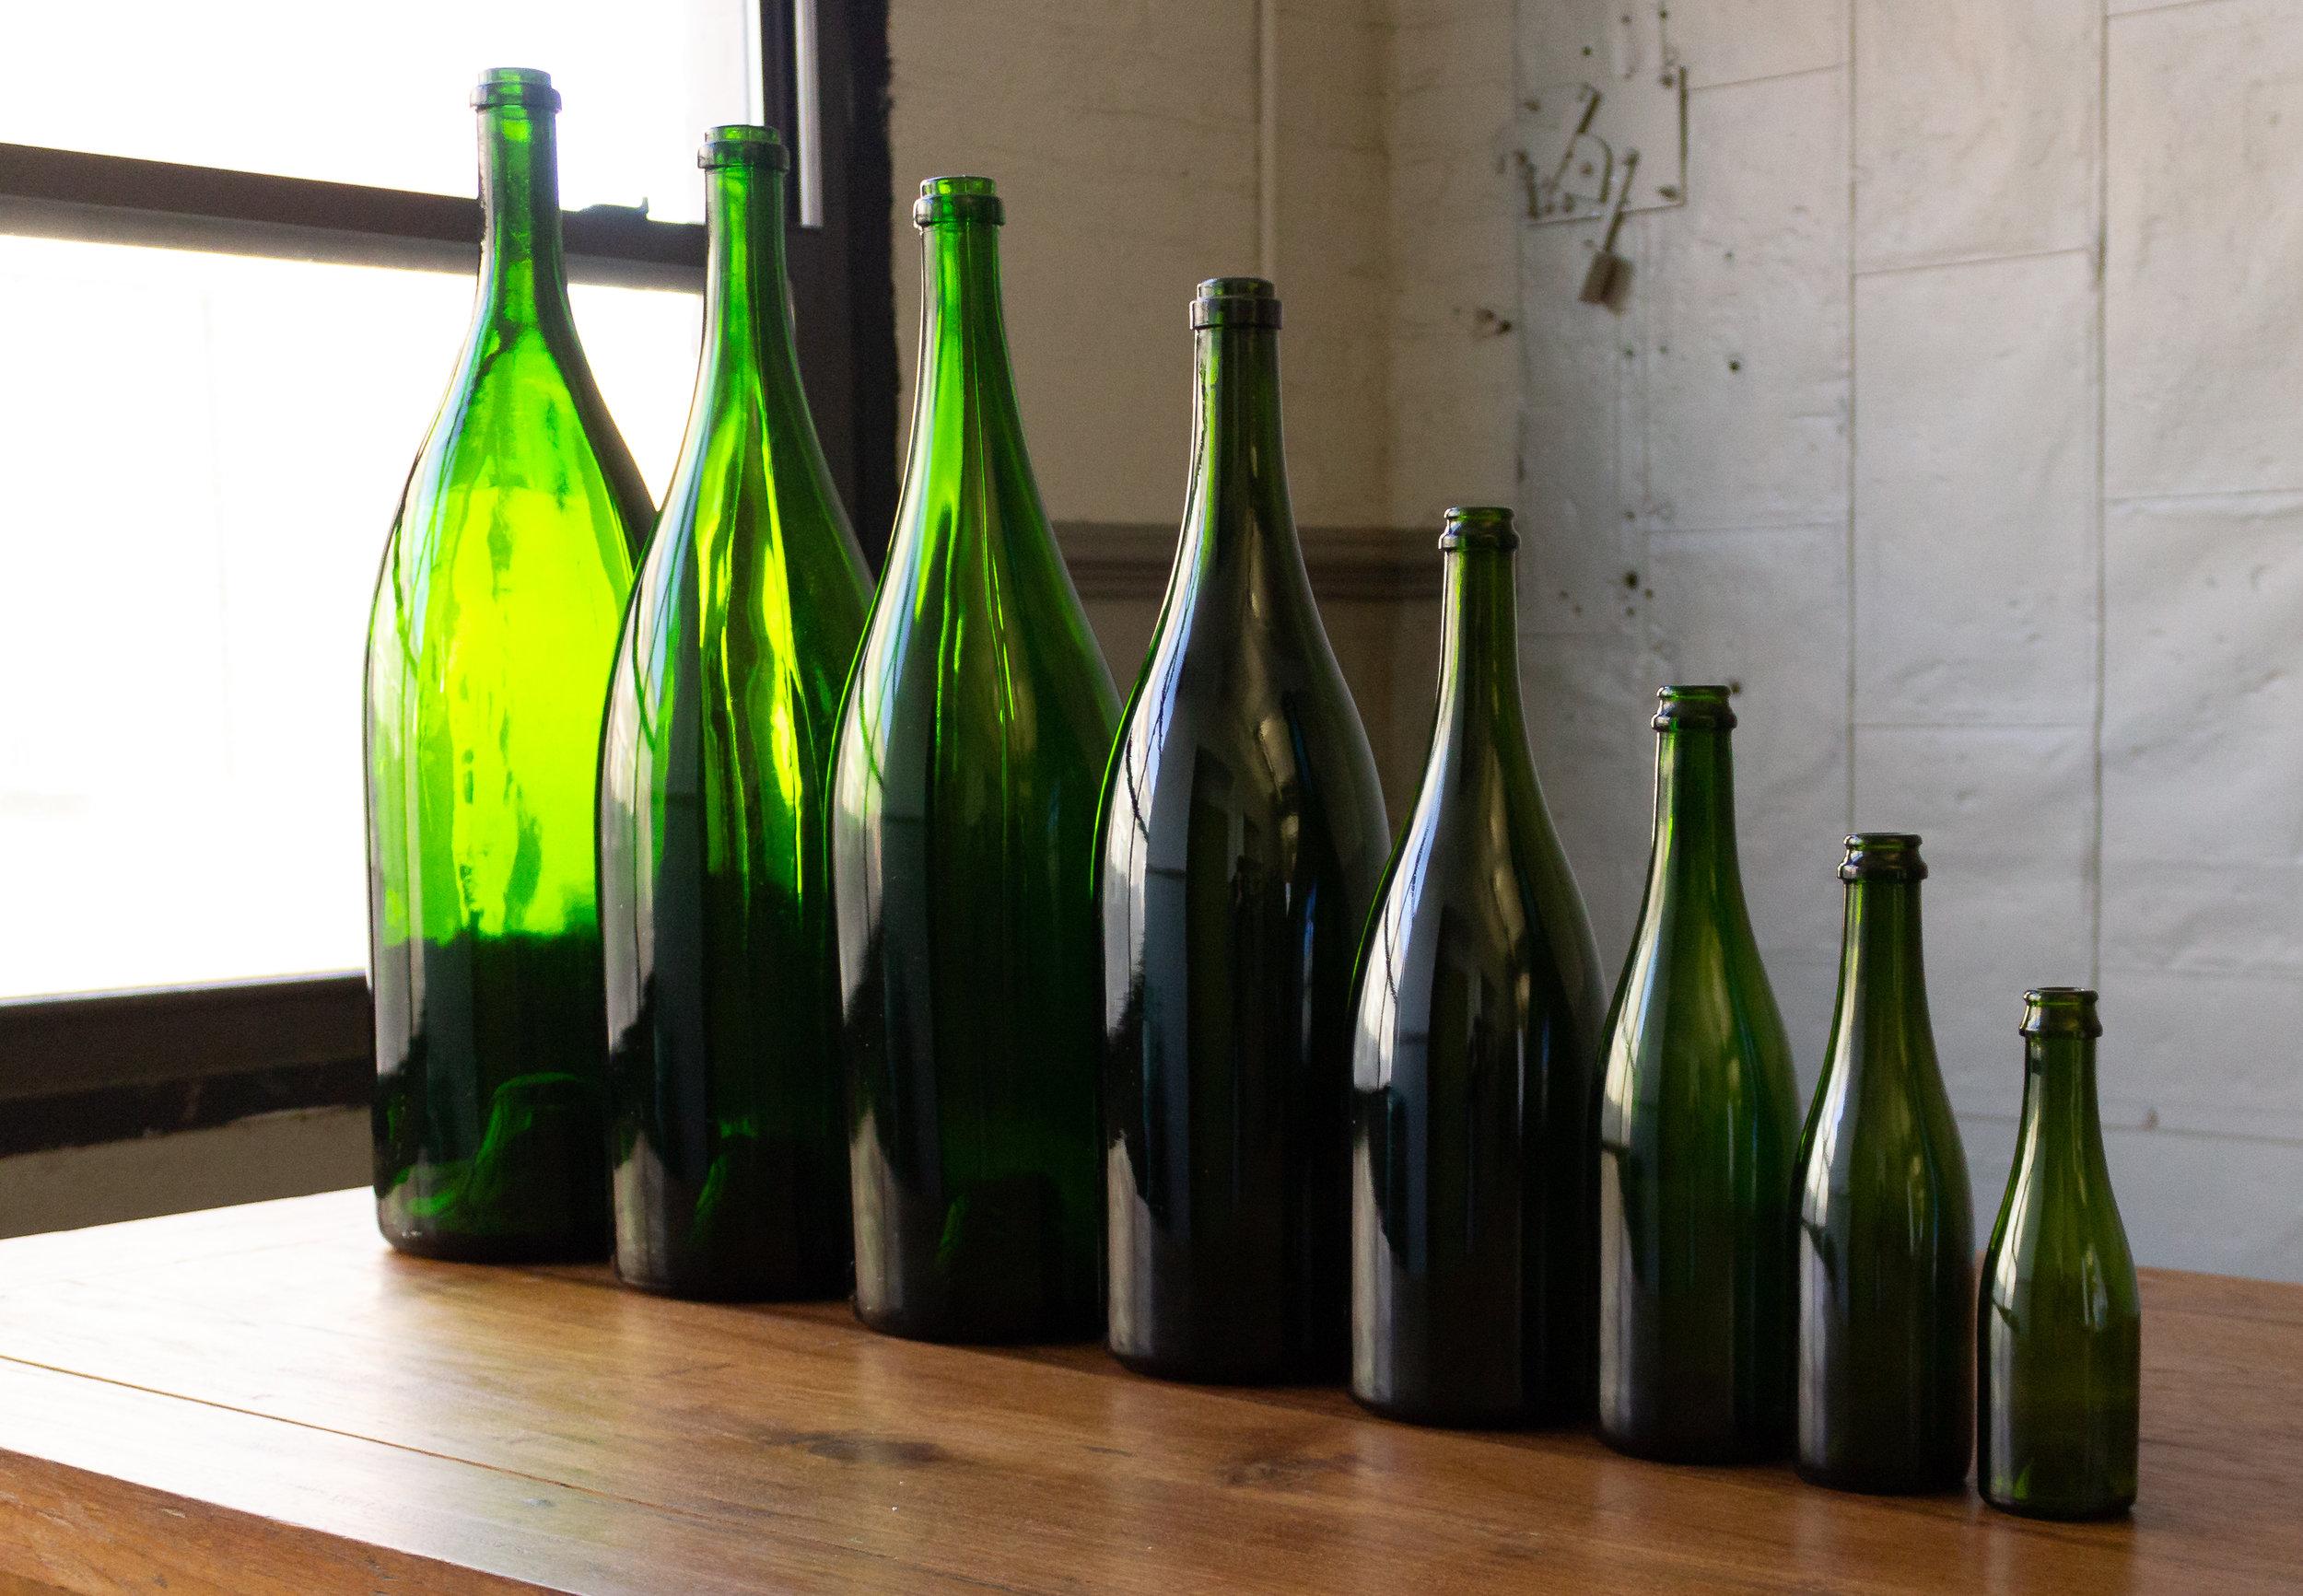 This set of eight vintage French champagne bottles from the 1920s offers a unique charm. Their sizes vary, ranging from 7.5 inches to 25 inches in height, allowing for an appealing visual display. Each bottle is in very good vintage condition and